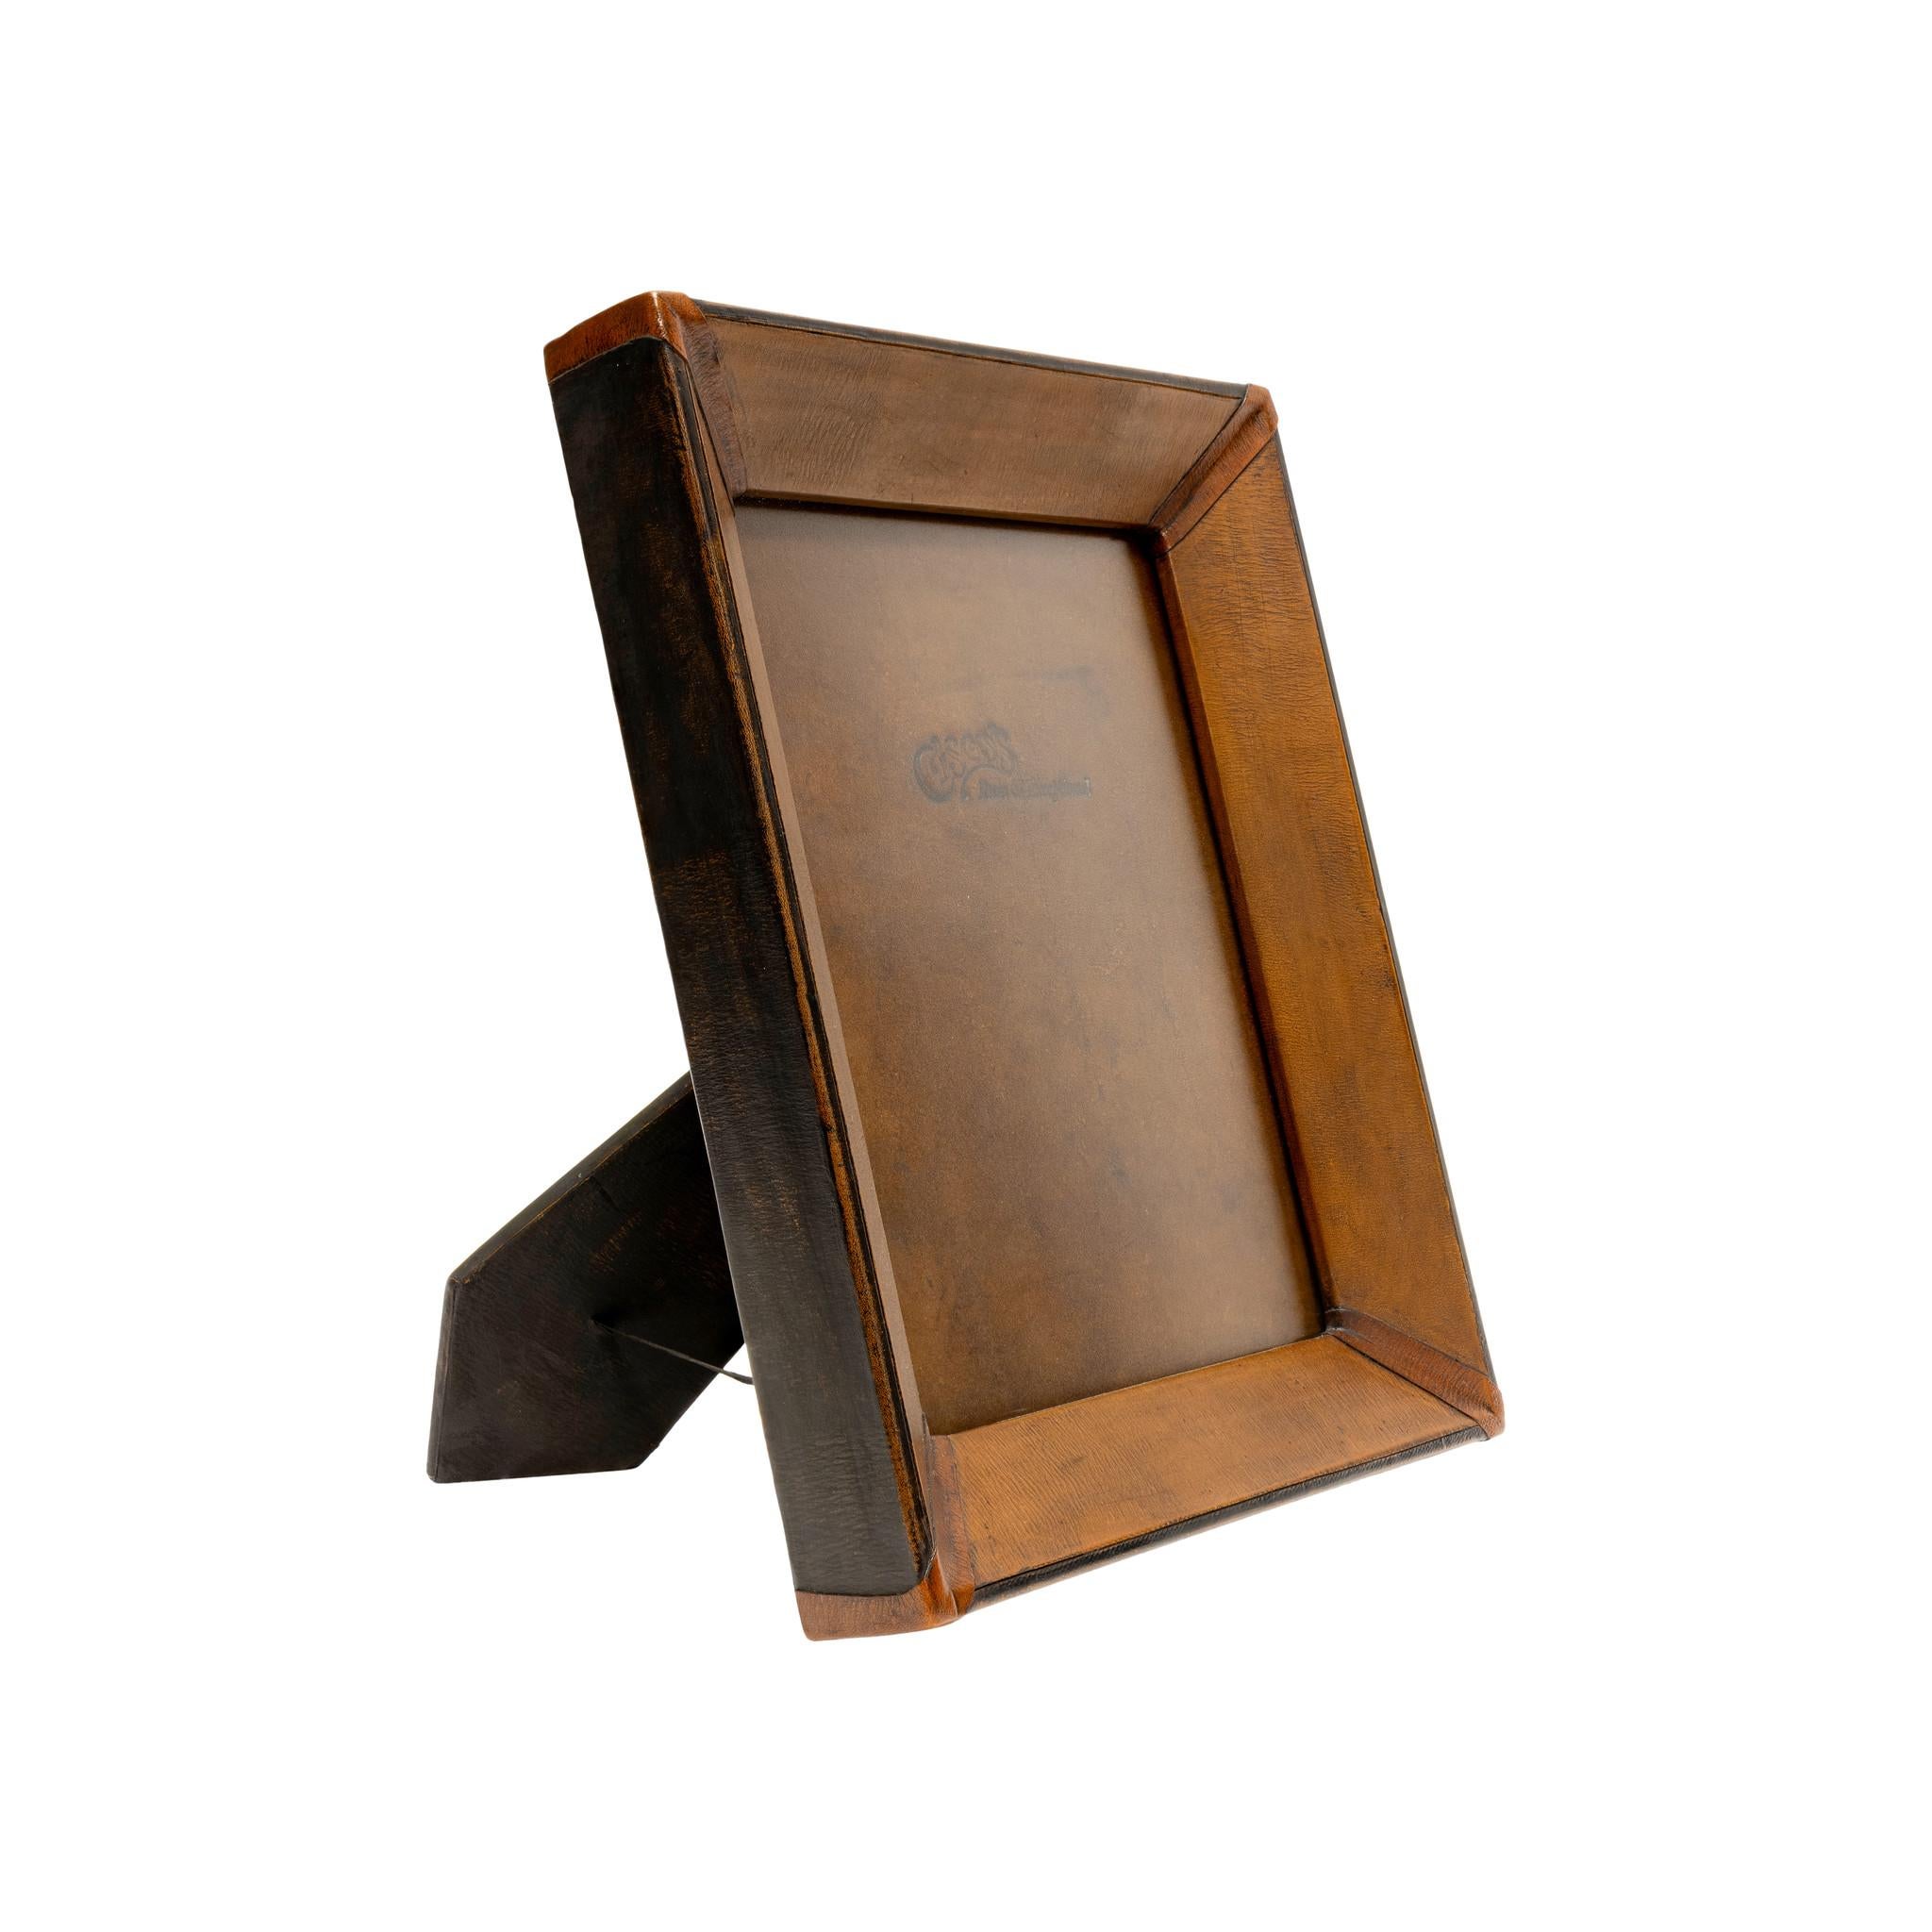 5x7 medium brown & black leather tabletop picture frame. Premium leather picture frames add the perfect accent to any home or office. Each frame is skillfully crafted by artisan saddle makers using genuine cowhide. Color: Medium brown with